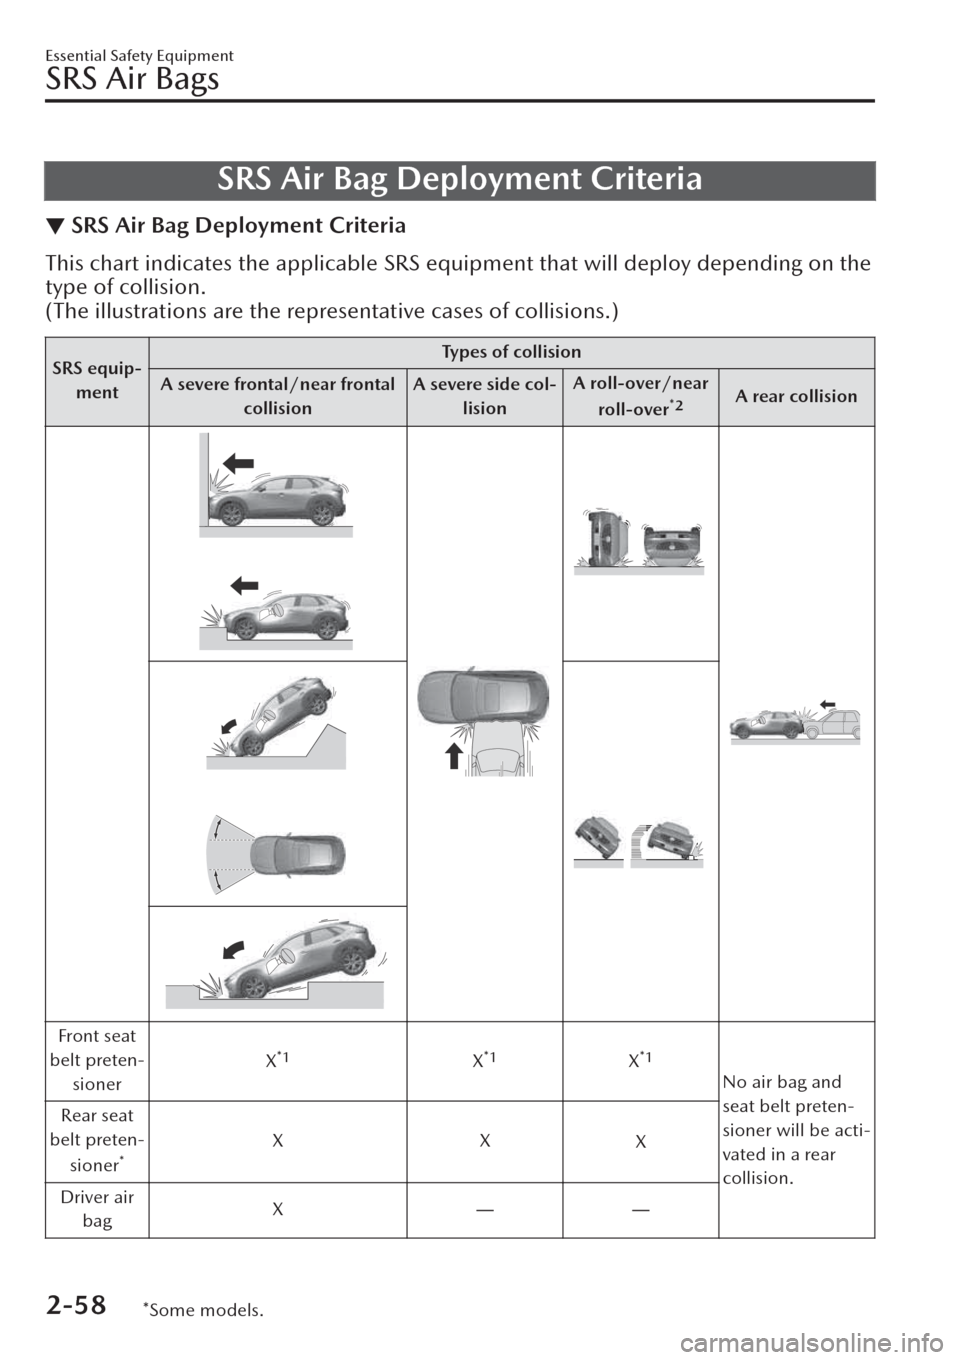 MAZDA MODEL CX-30 2019   (in English) Manual PDF SRS Air Bag Deployment Criteria
▼SRS Air Bag Deployment Criteria
This chart indicates the applicable SRS equipment that will deploy depending on the
type of collision.
(The illustrations are the rep